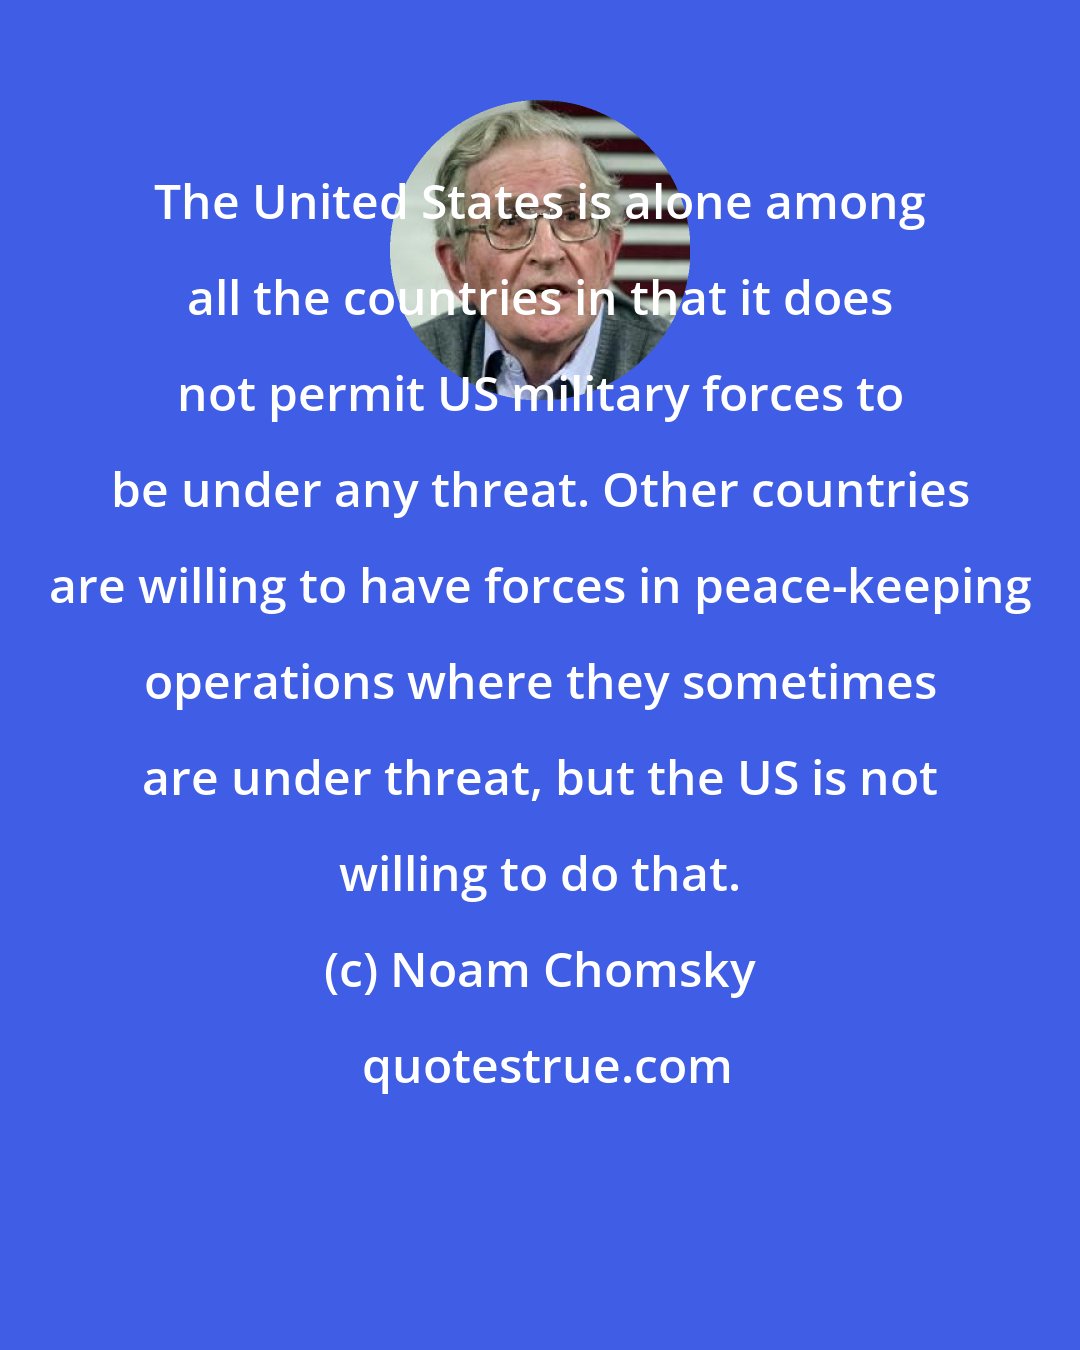 Noam Chomsky: The United States is alone among all the countries in that it does not permit US military forces to be under any threat. Other countries are willing to have forces in peace-keeping operations where they sometimes are under threat, but the US is not willing to do that.